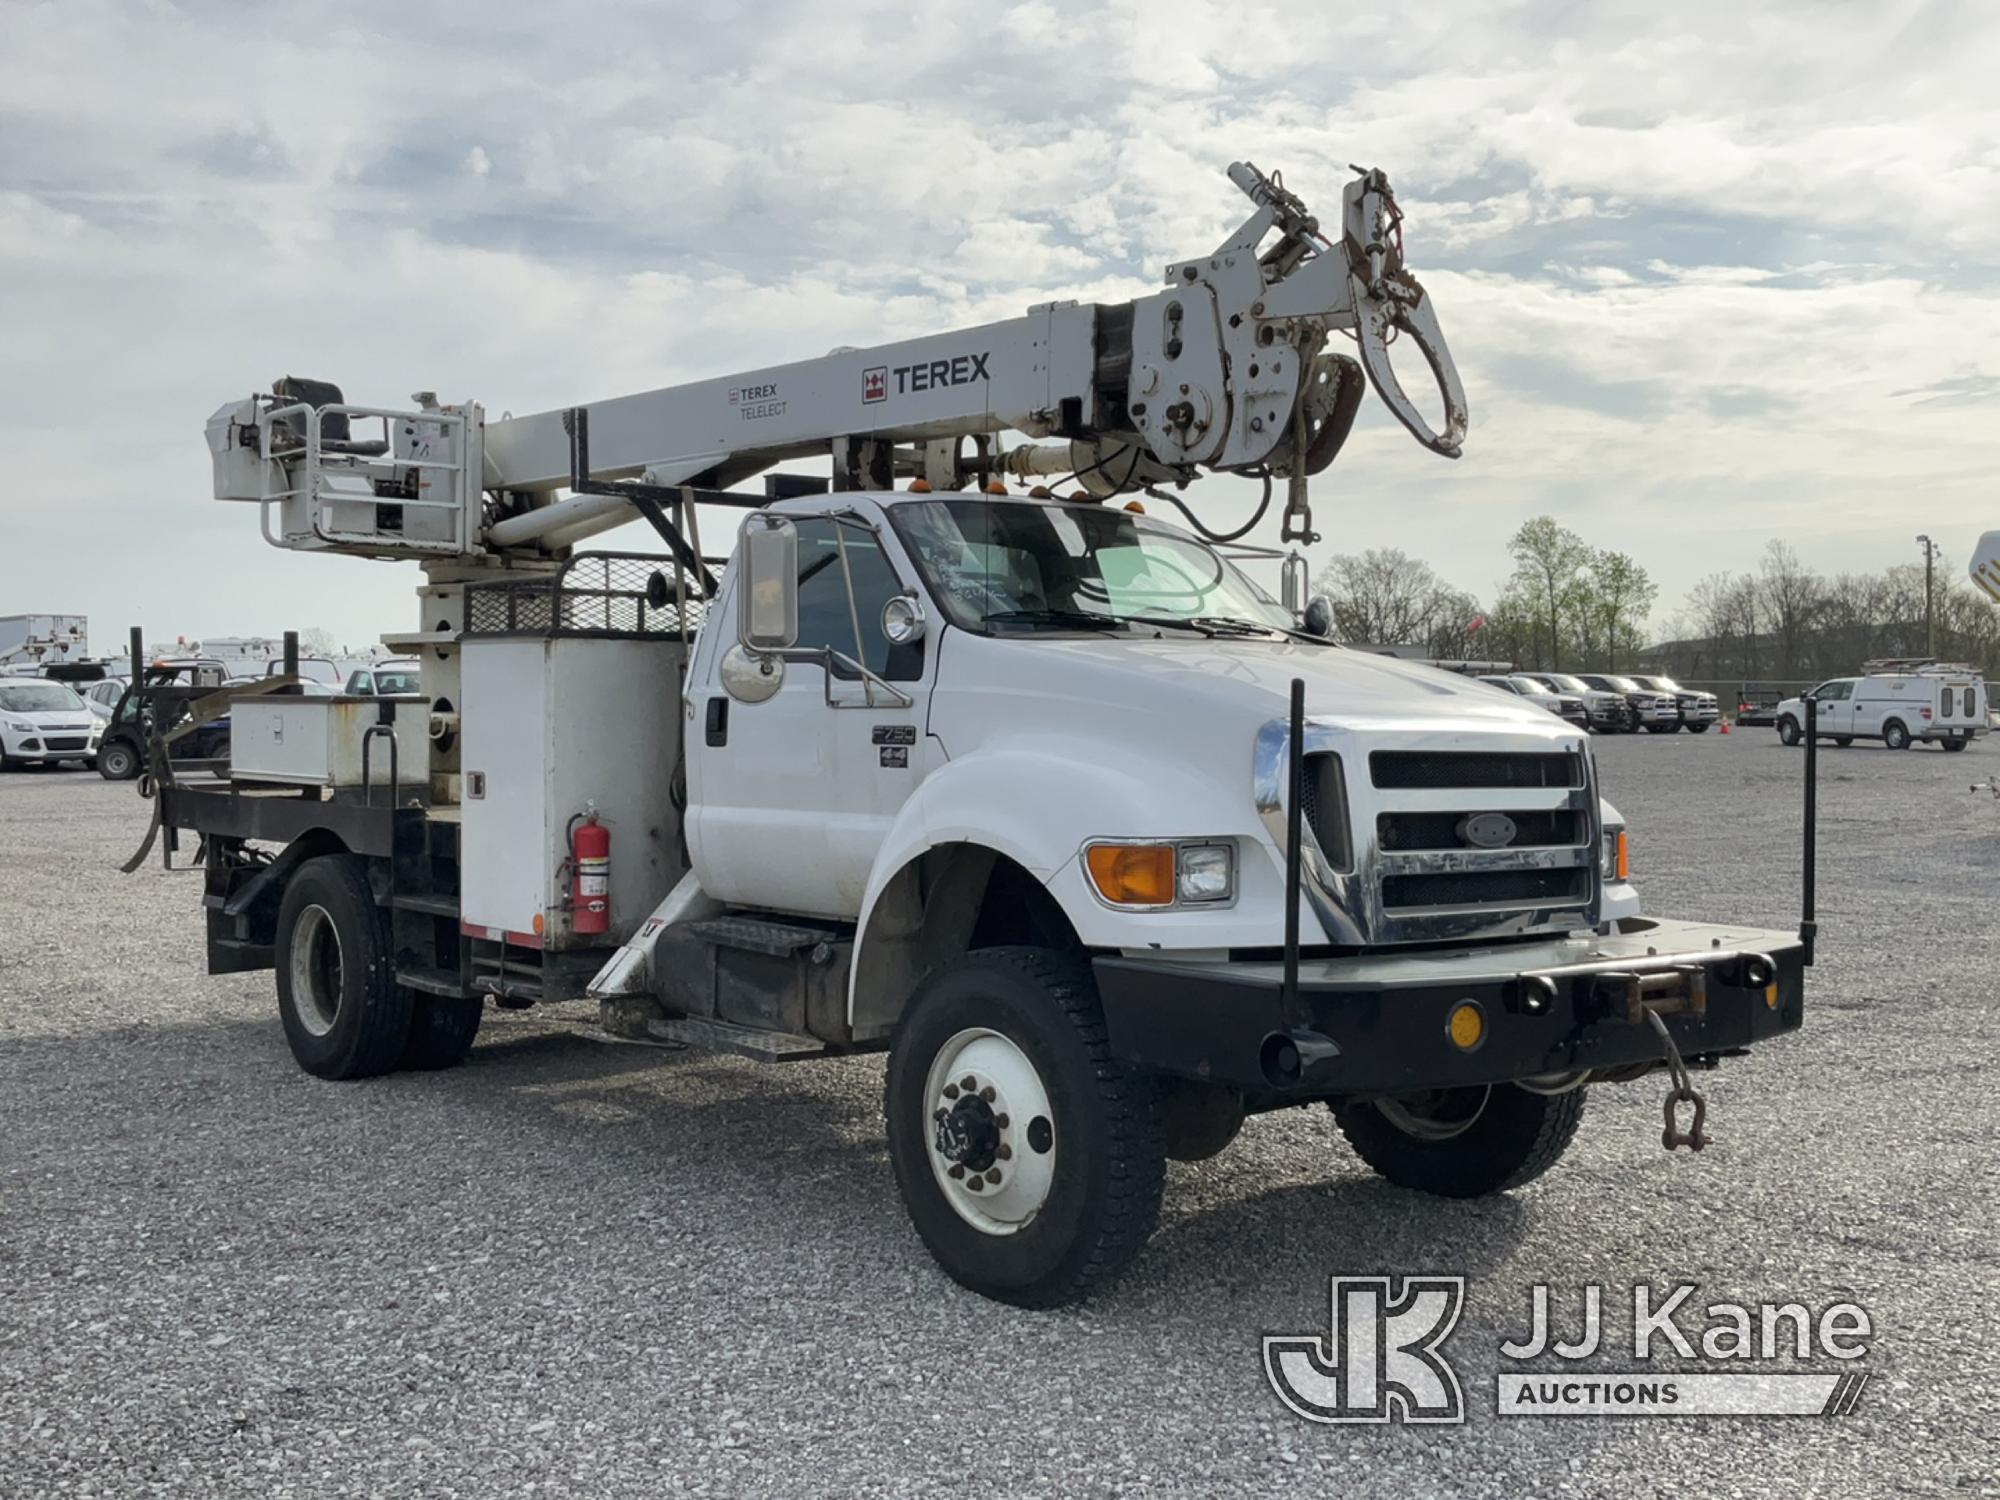 (Verona, KY) Telelect Commander C4045, Digger Derrick rear mounted on 2007 Ford F750 4x4 Flatbed/Uti